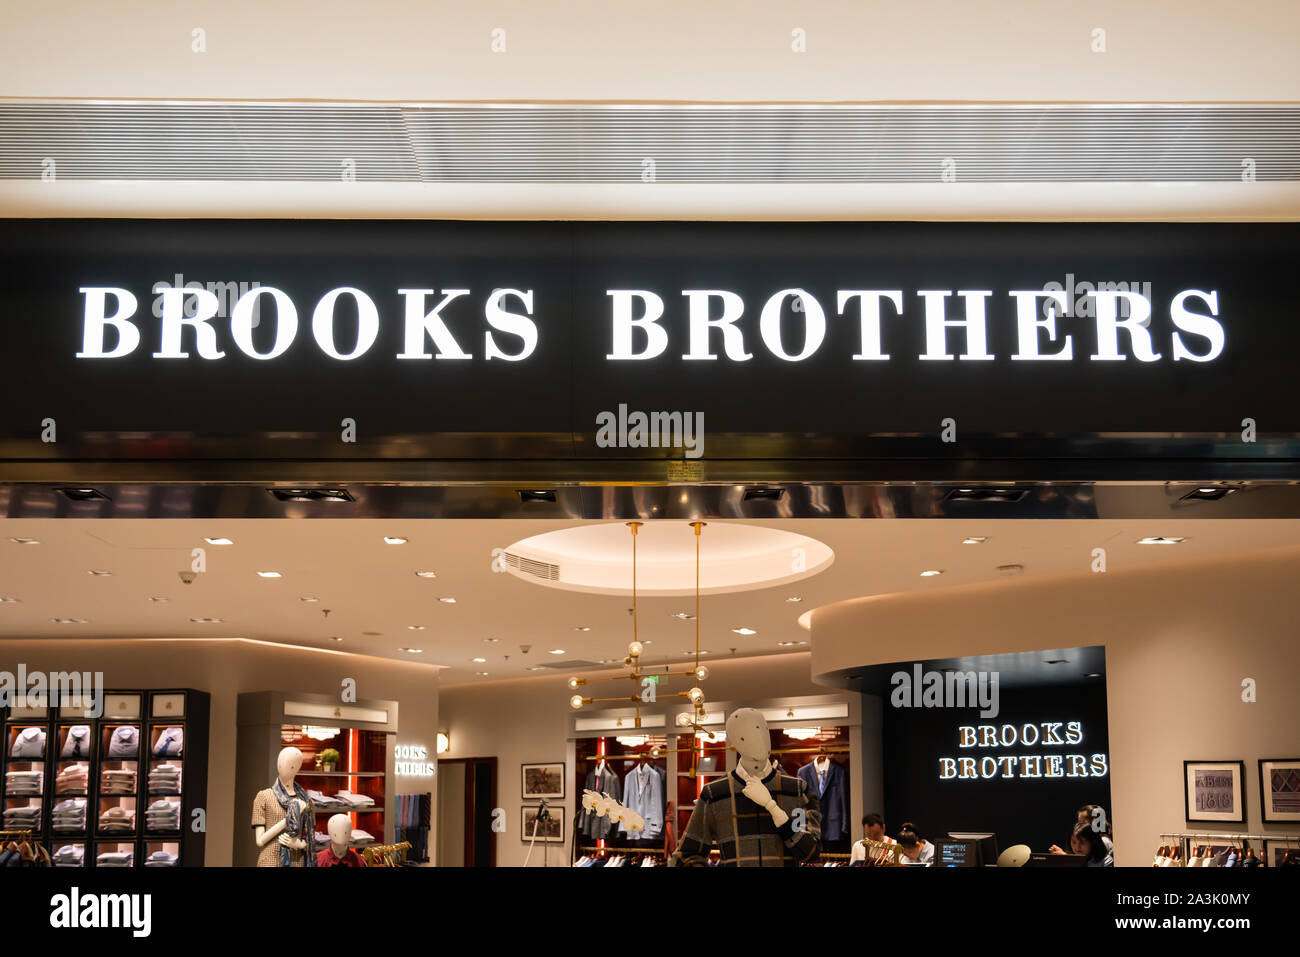 closest brooks brothers store to me